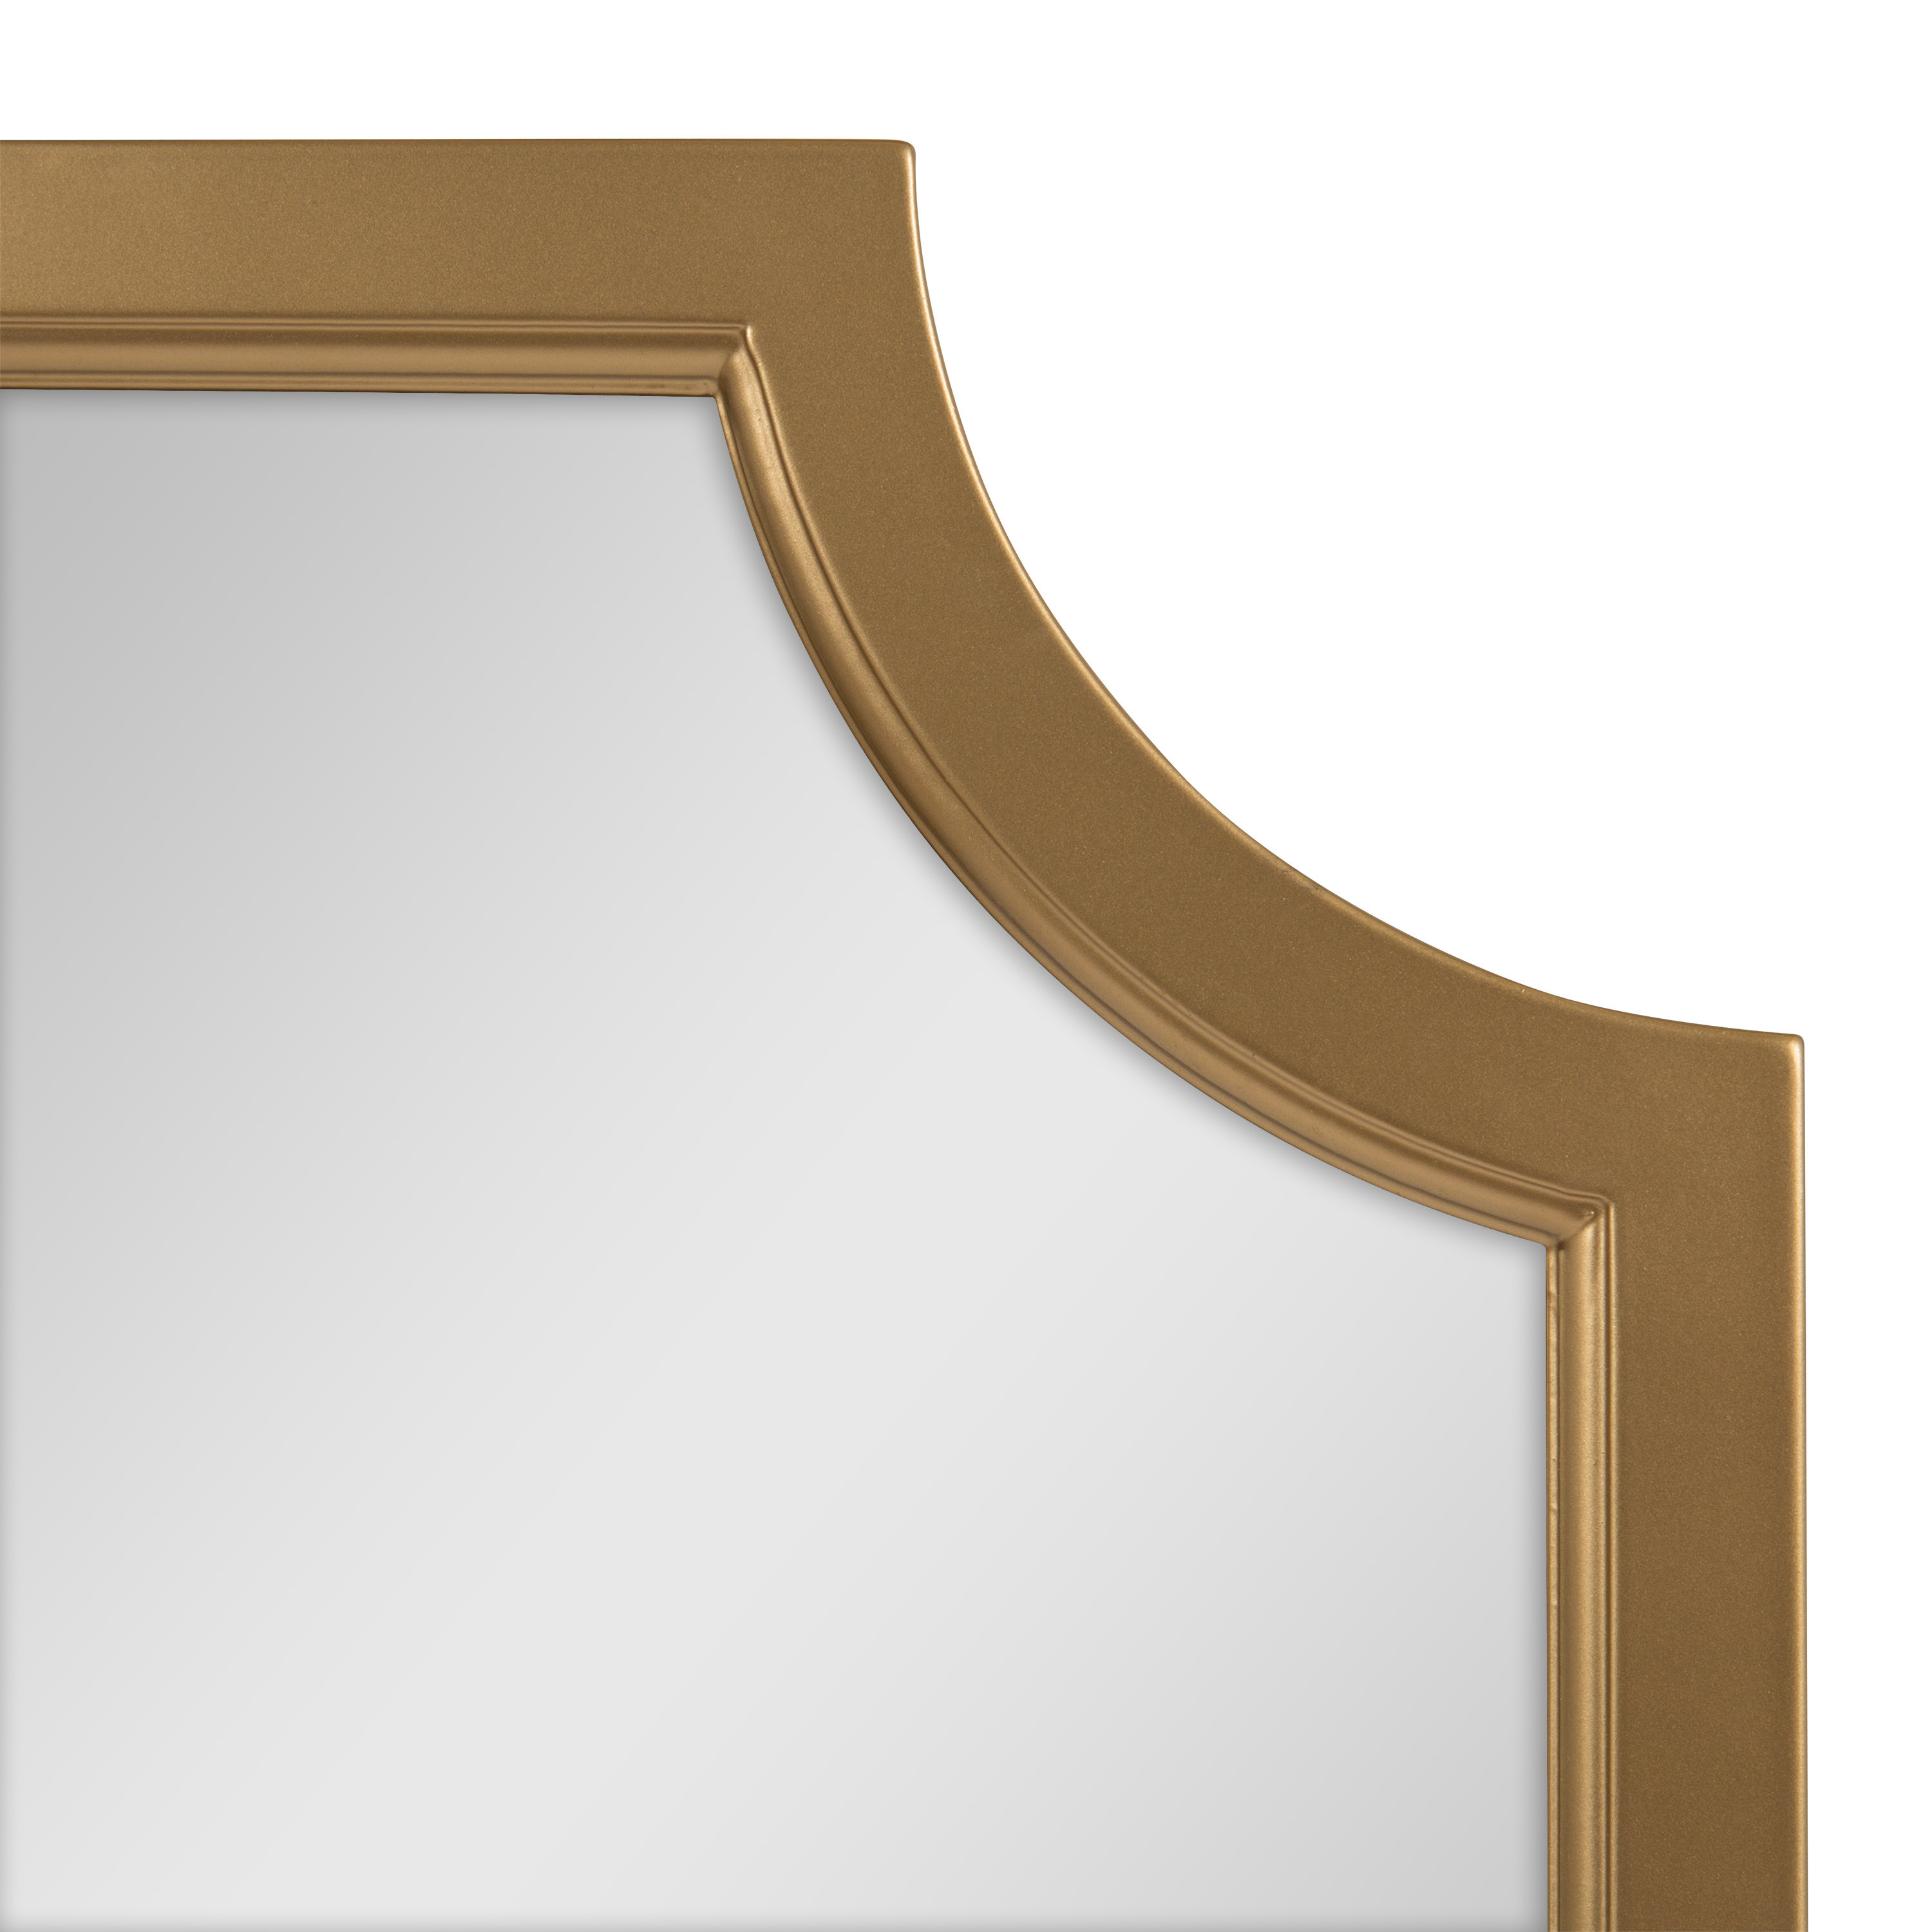 Kate and Laurel Hogan Wood Framed Mirror with Scallop Corners, 24 x 36  Inches, Gold